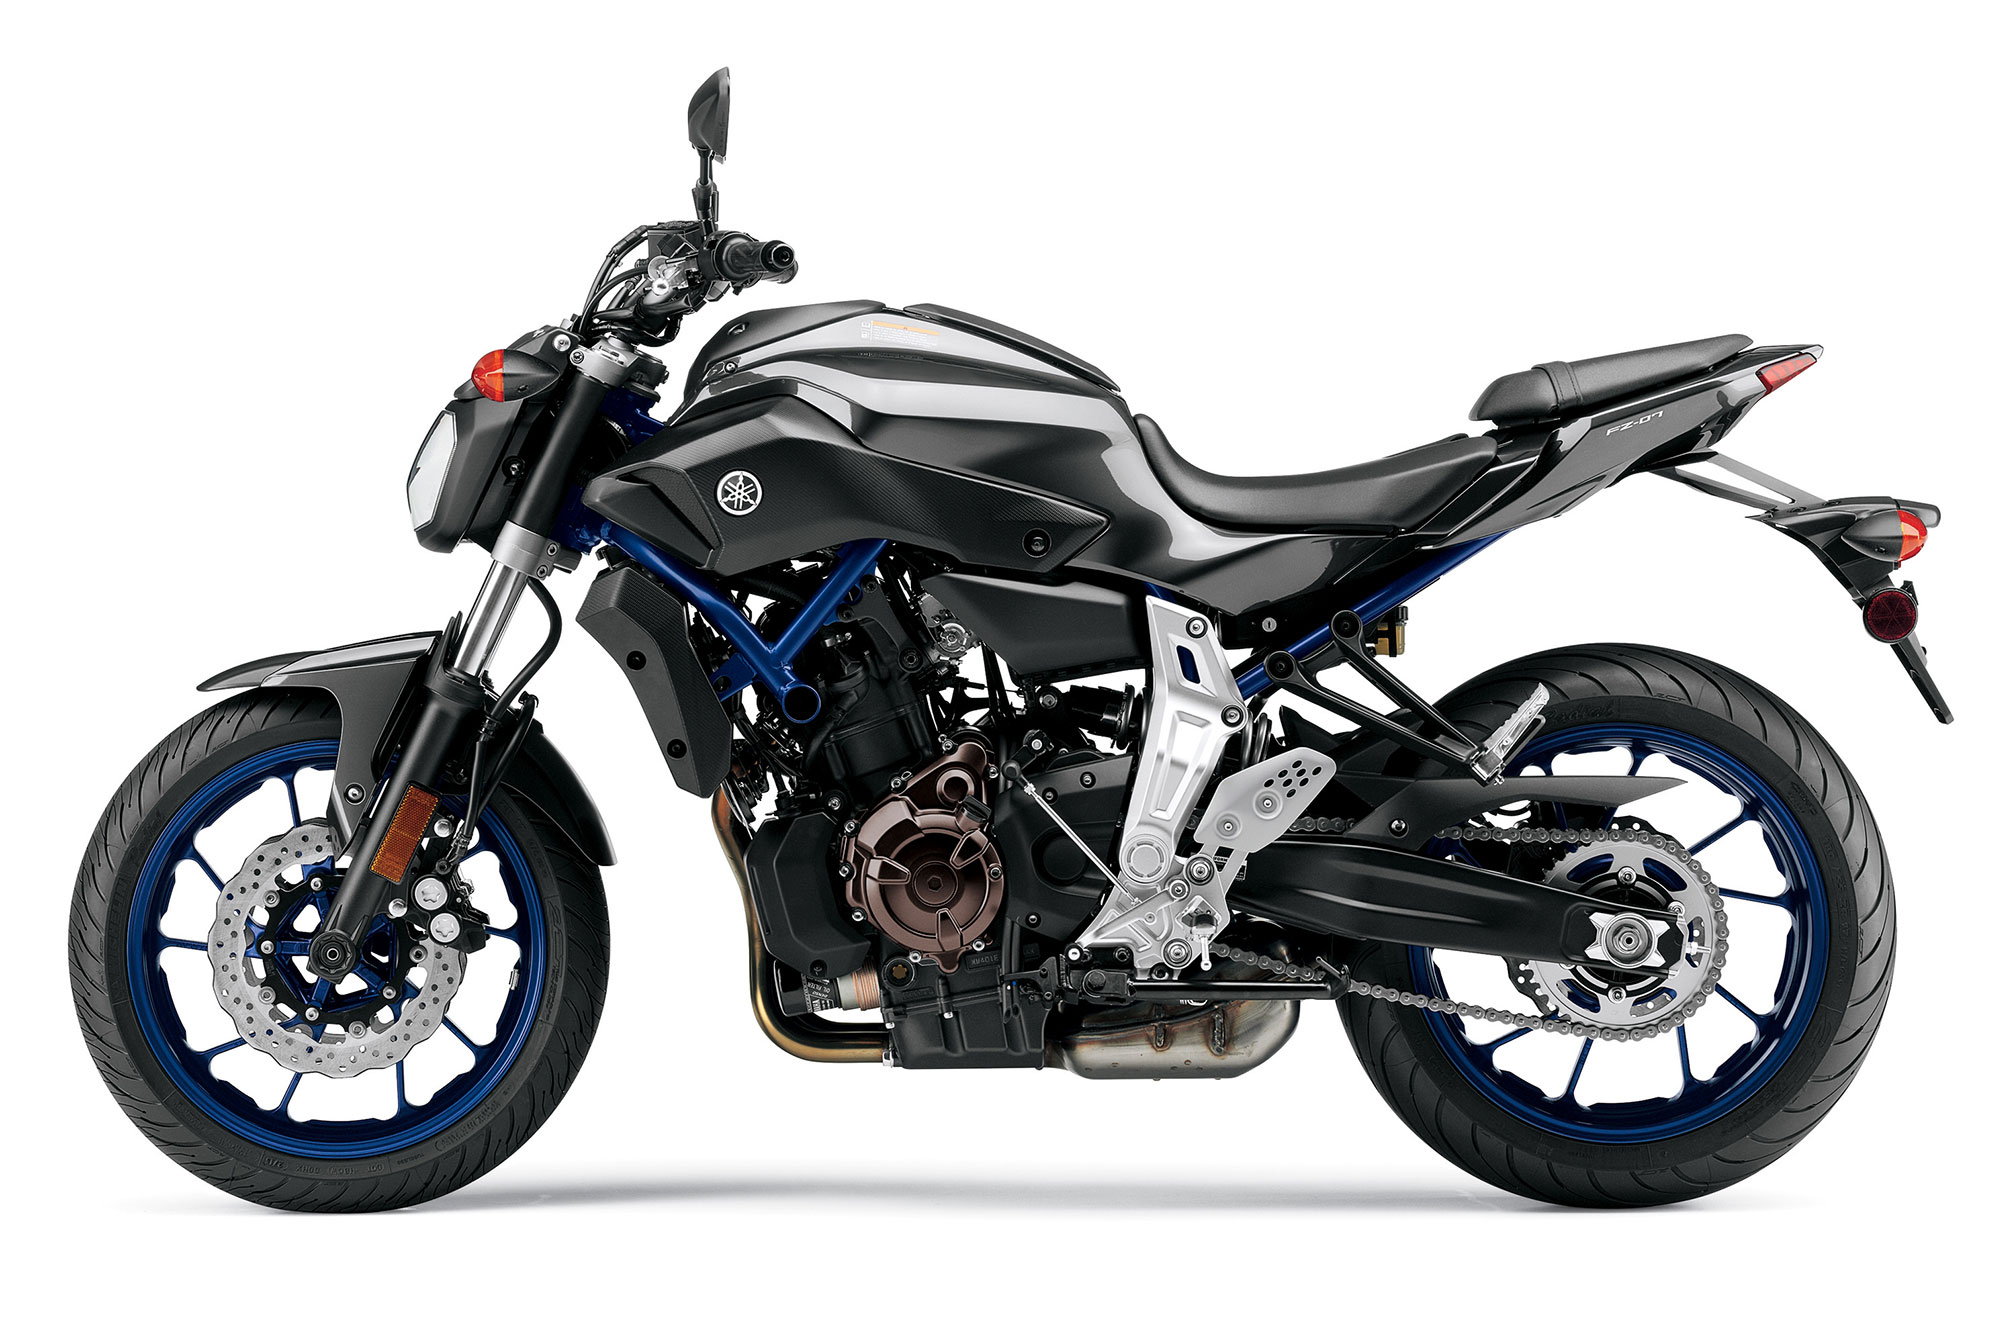 The 2015 Yamaha FZ-07 Breakdown and Review